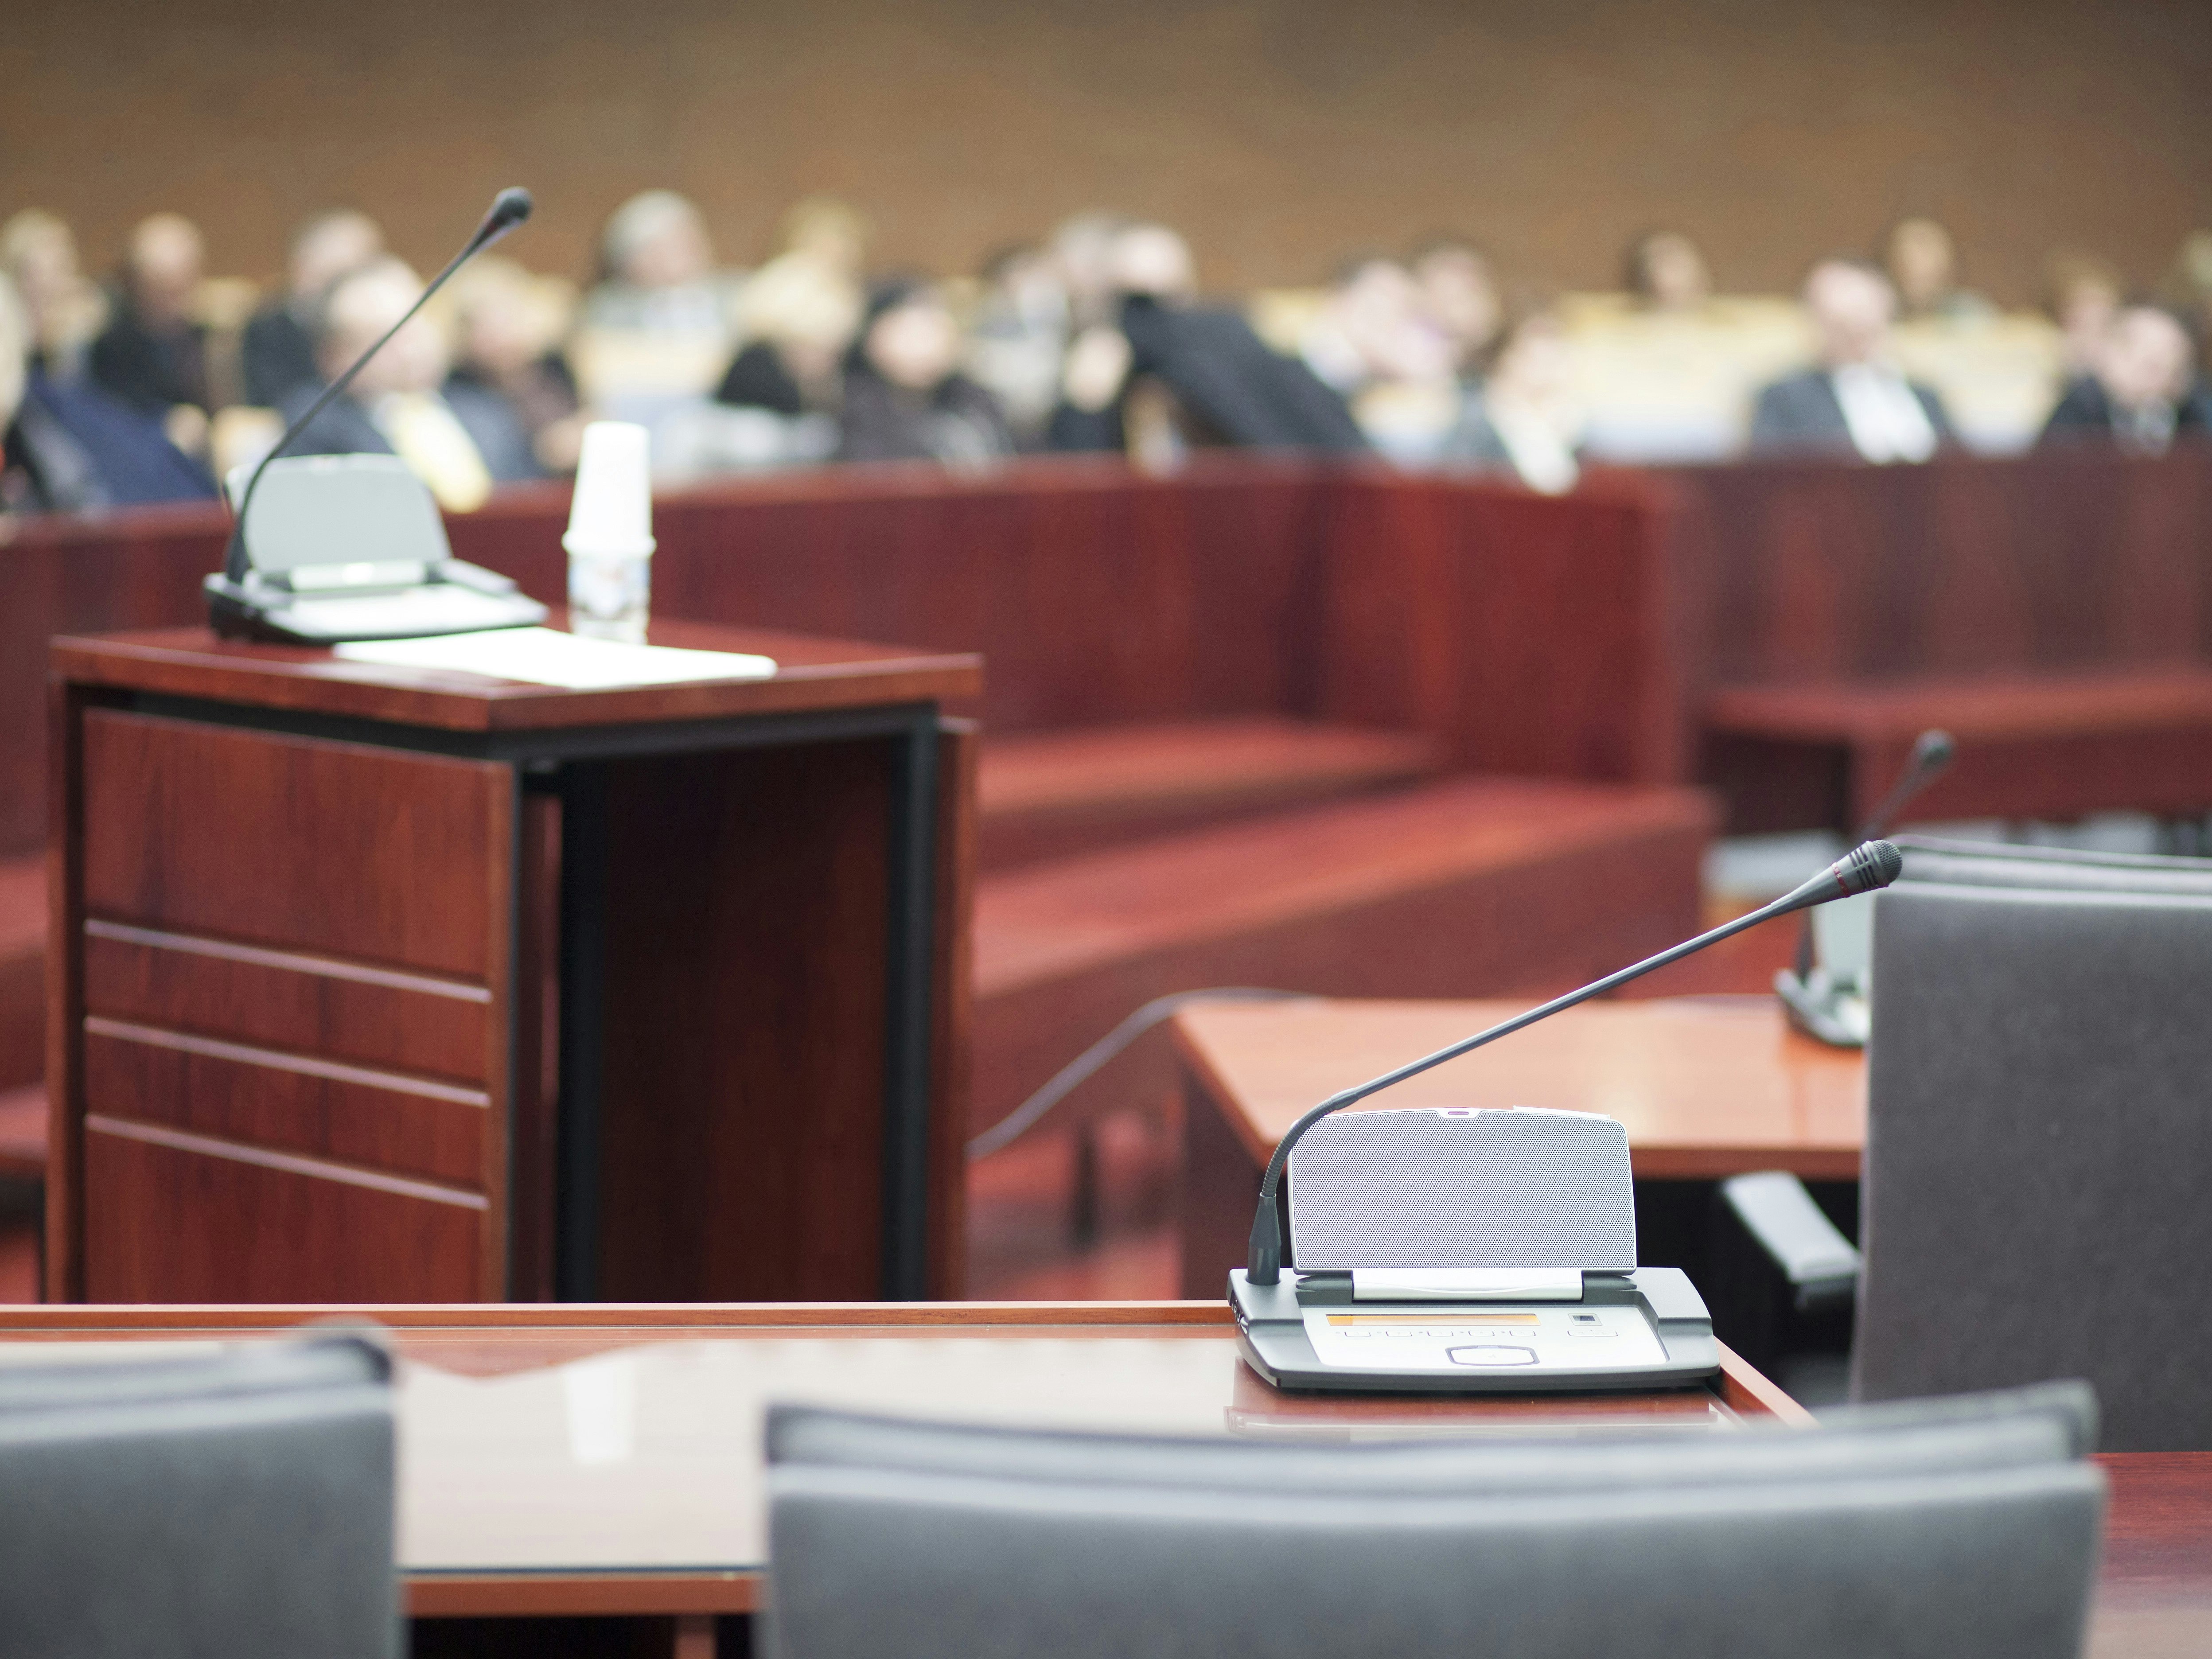 Taking place in Townsville, Queensland, this first week of the Disability Royal Commission hearings will look into the experiences of people with disability. [Source: Shutterstock]
